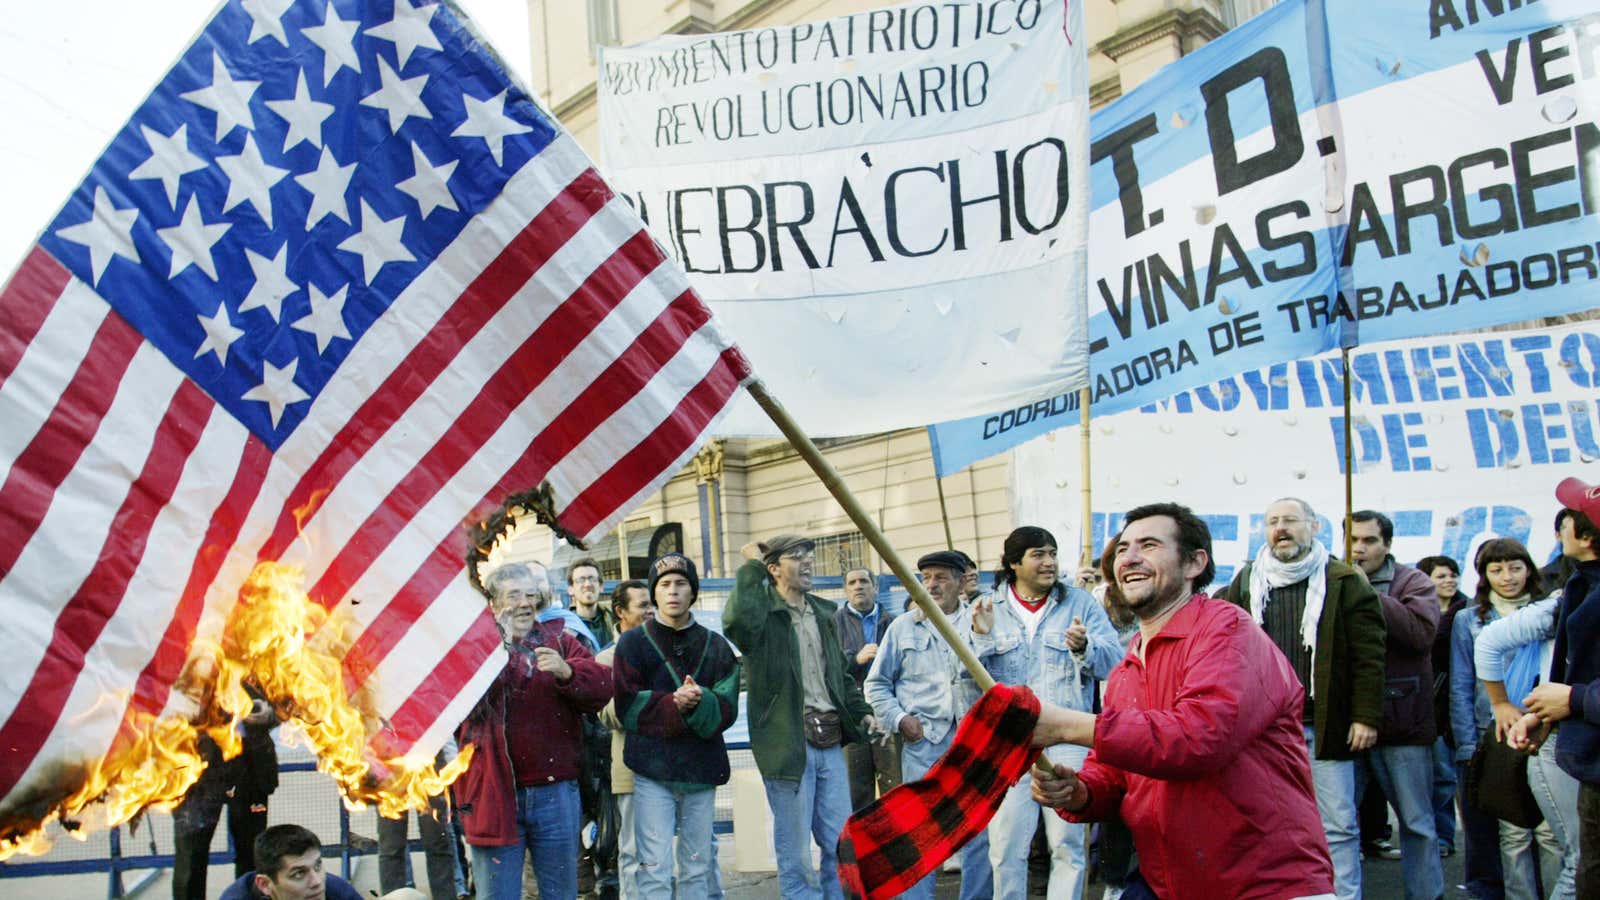 Argentine activists burn a United States flag  in the midst of the country’s economic debt
crisis.